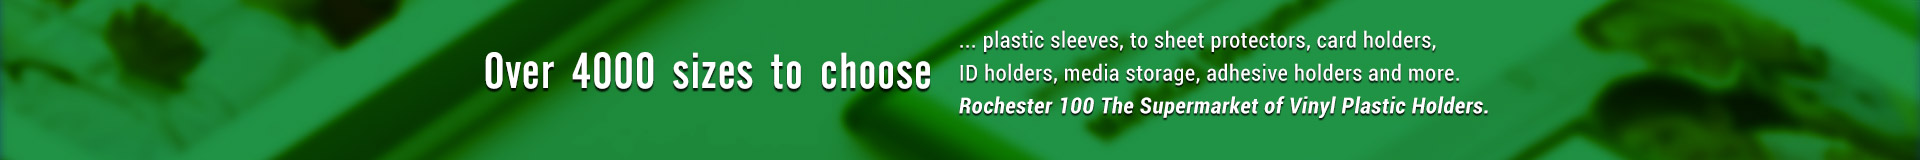 Over 4000 sizes to choose plastic sleeves, to sheet protectors, card holders, ID holders, media storage, adhesive holders and more. Rochester 100 The Supermarket of Vinyl Plastic Holders.